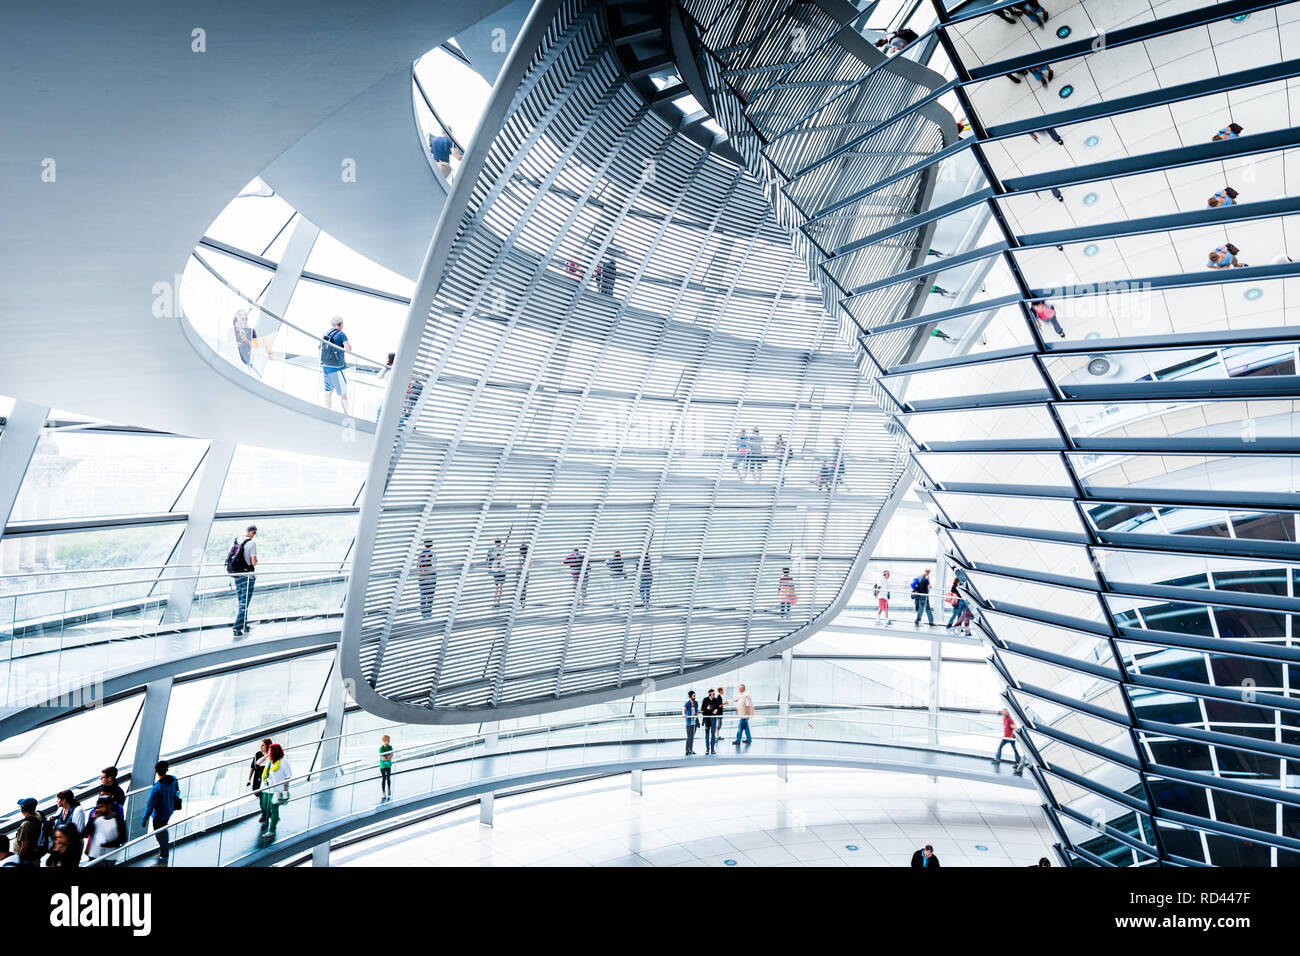 BERLIN - JULY 19, 2015: Interior view of famous Reichstag Dome in Berlin, Germany. Constructed to symbolize the reunification of Germany it's now one  Stock Photo